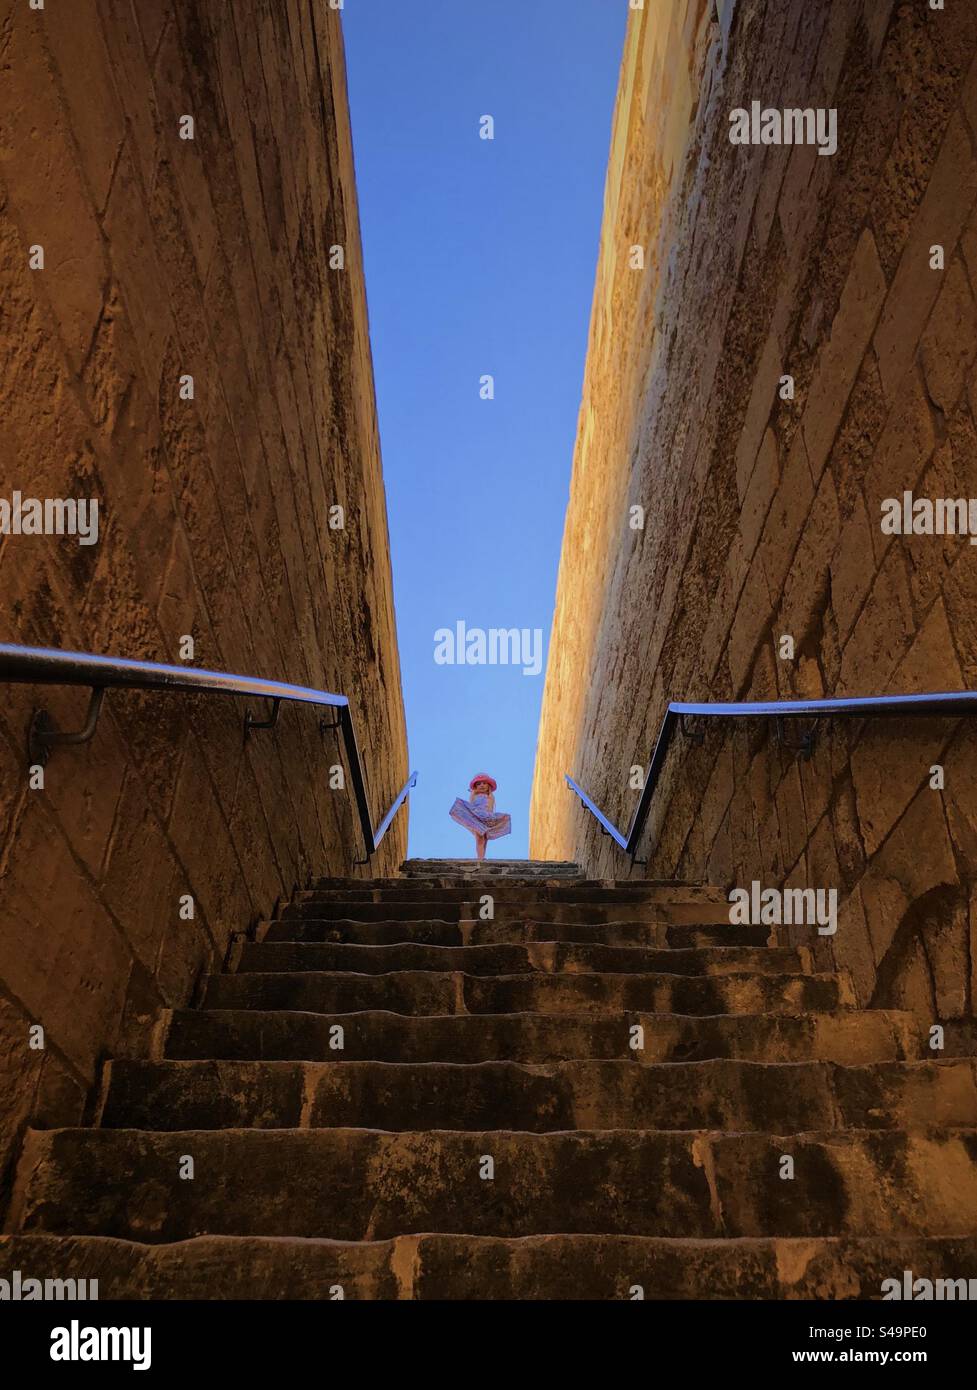 Low angle view, looking up stone staircase at little girl framed against blue sky Stock Photo